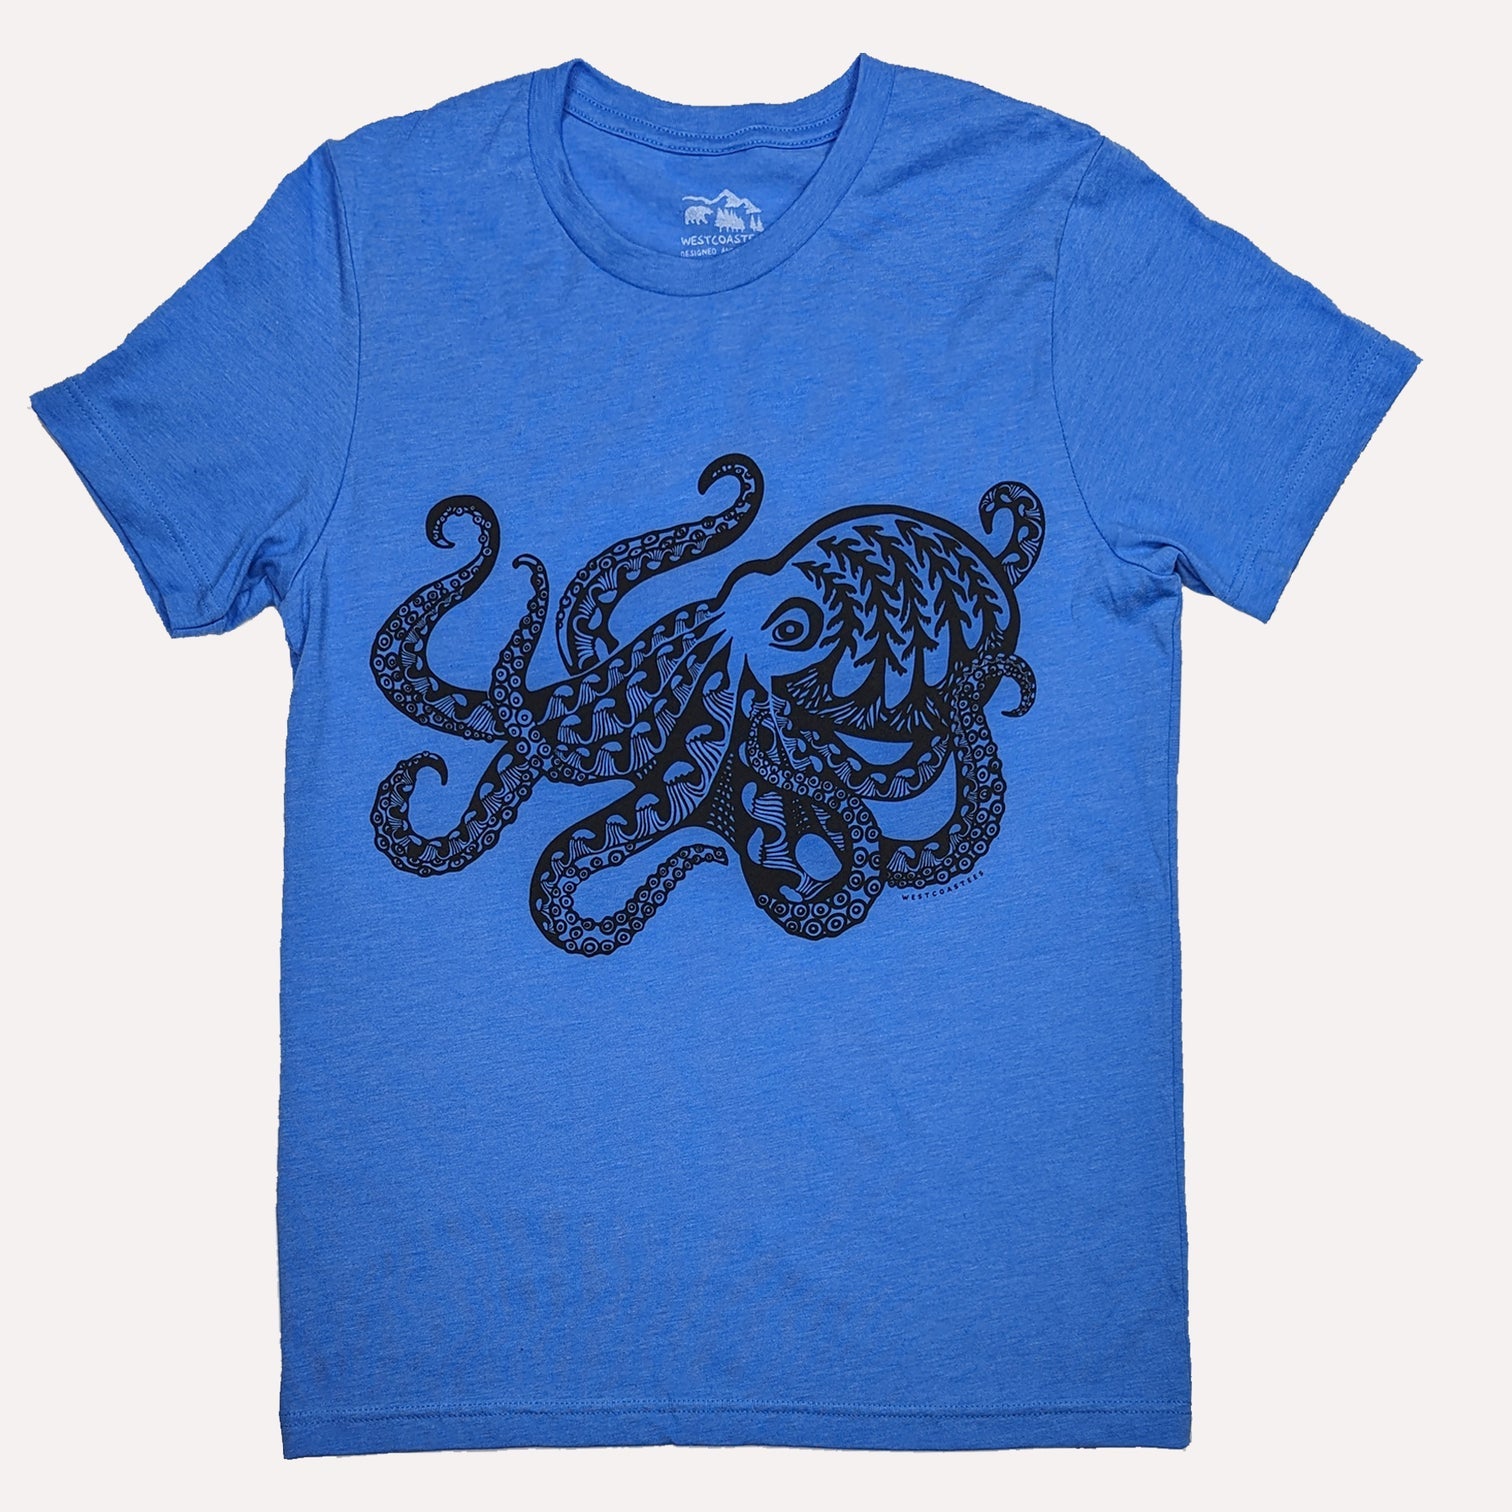 Westcoastees T-Shirt Forest Octopus - Westcoastees T-Shirt Forest Octopus -  - House of Himwitsa Native Art Gallery and Gifts